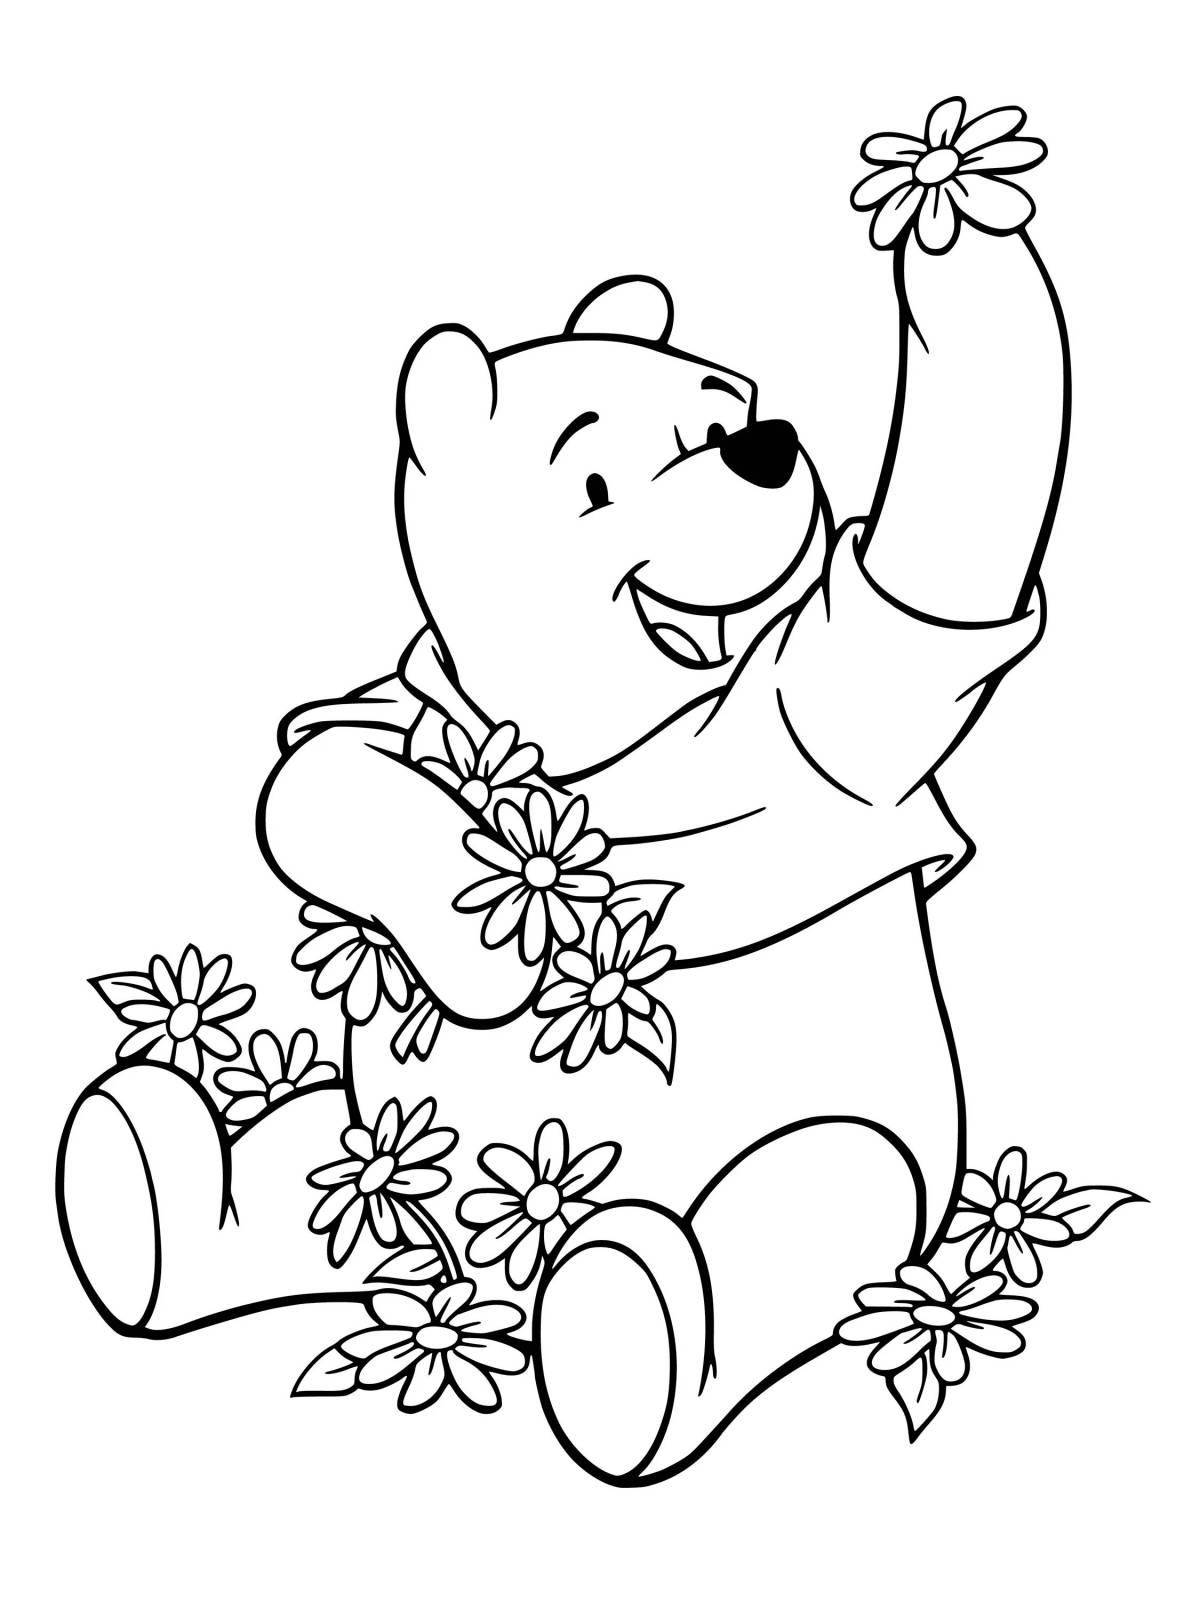 Color bear with flowers